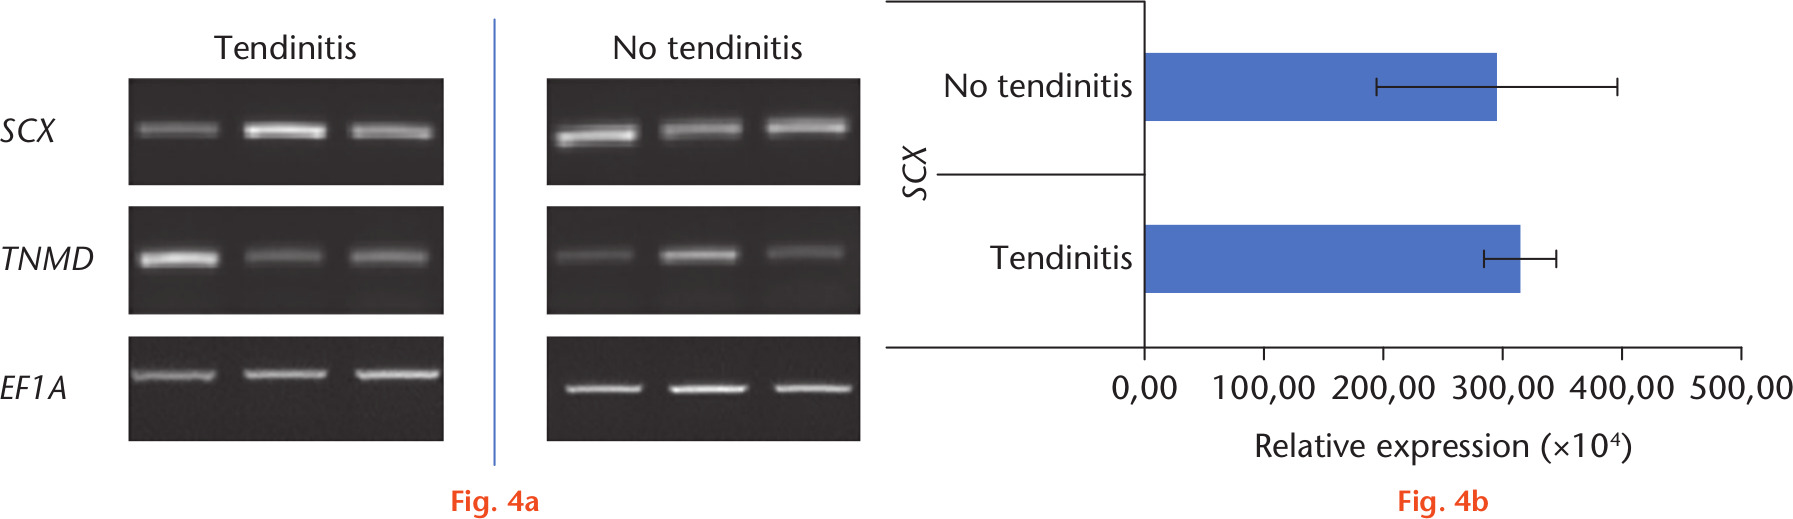 Fig. 4 
            a) Real-time-polymerase chain reaction (RT-PCR) and b) quantitative real-time-polymerase chain reaction (qRT-PCR) analyses of inflamed and non-inflamed tendon samples. Expression patterns of scleraxis (SCX) and tenomodulin (TNMD) in long head of the biceps (LHB) samples with and without tendinitis. For RT-PCR, elongation factor 1α (EF1A), and for qRT-PCR, ribosomal protein S27a (RPS27A) served as housekeeping genes for normalization of the expression values. A total of six donors were included.
          